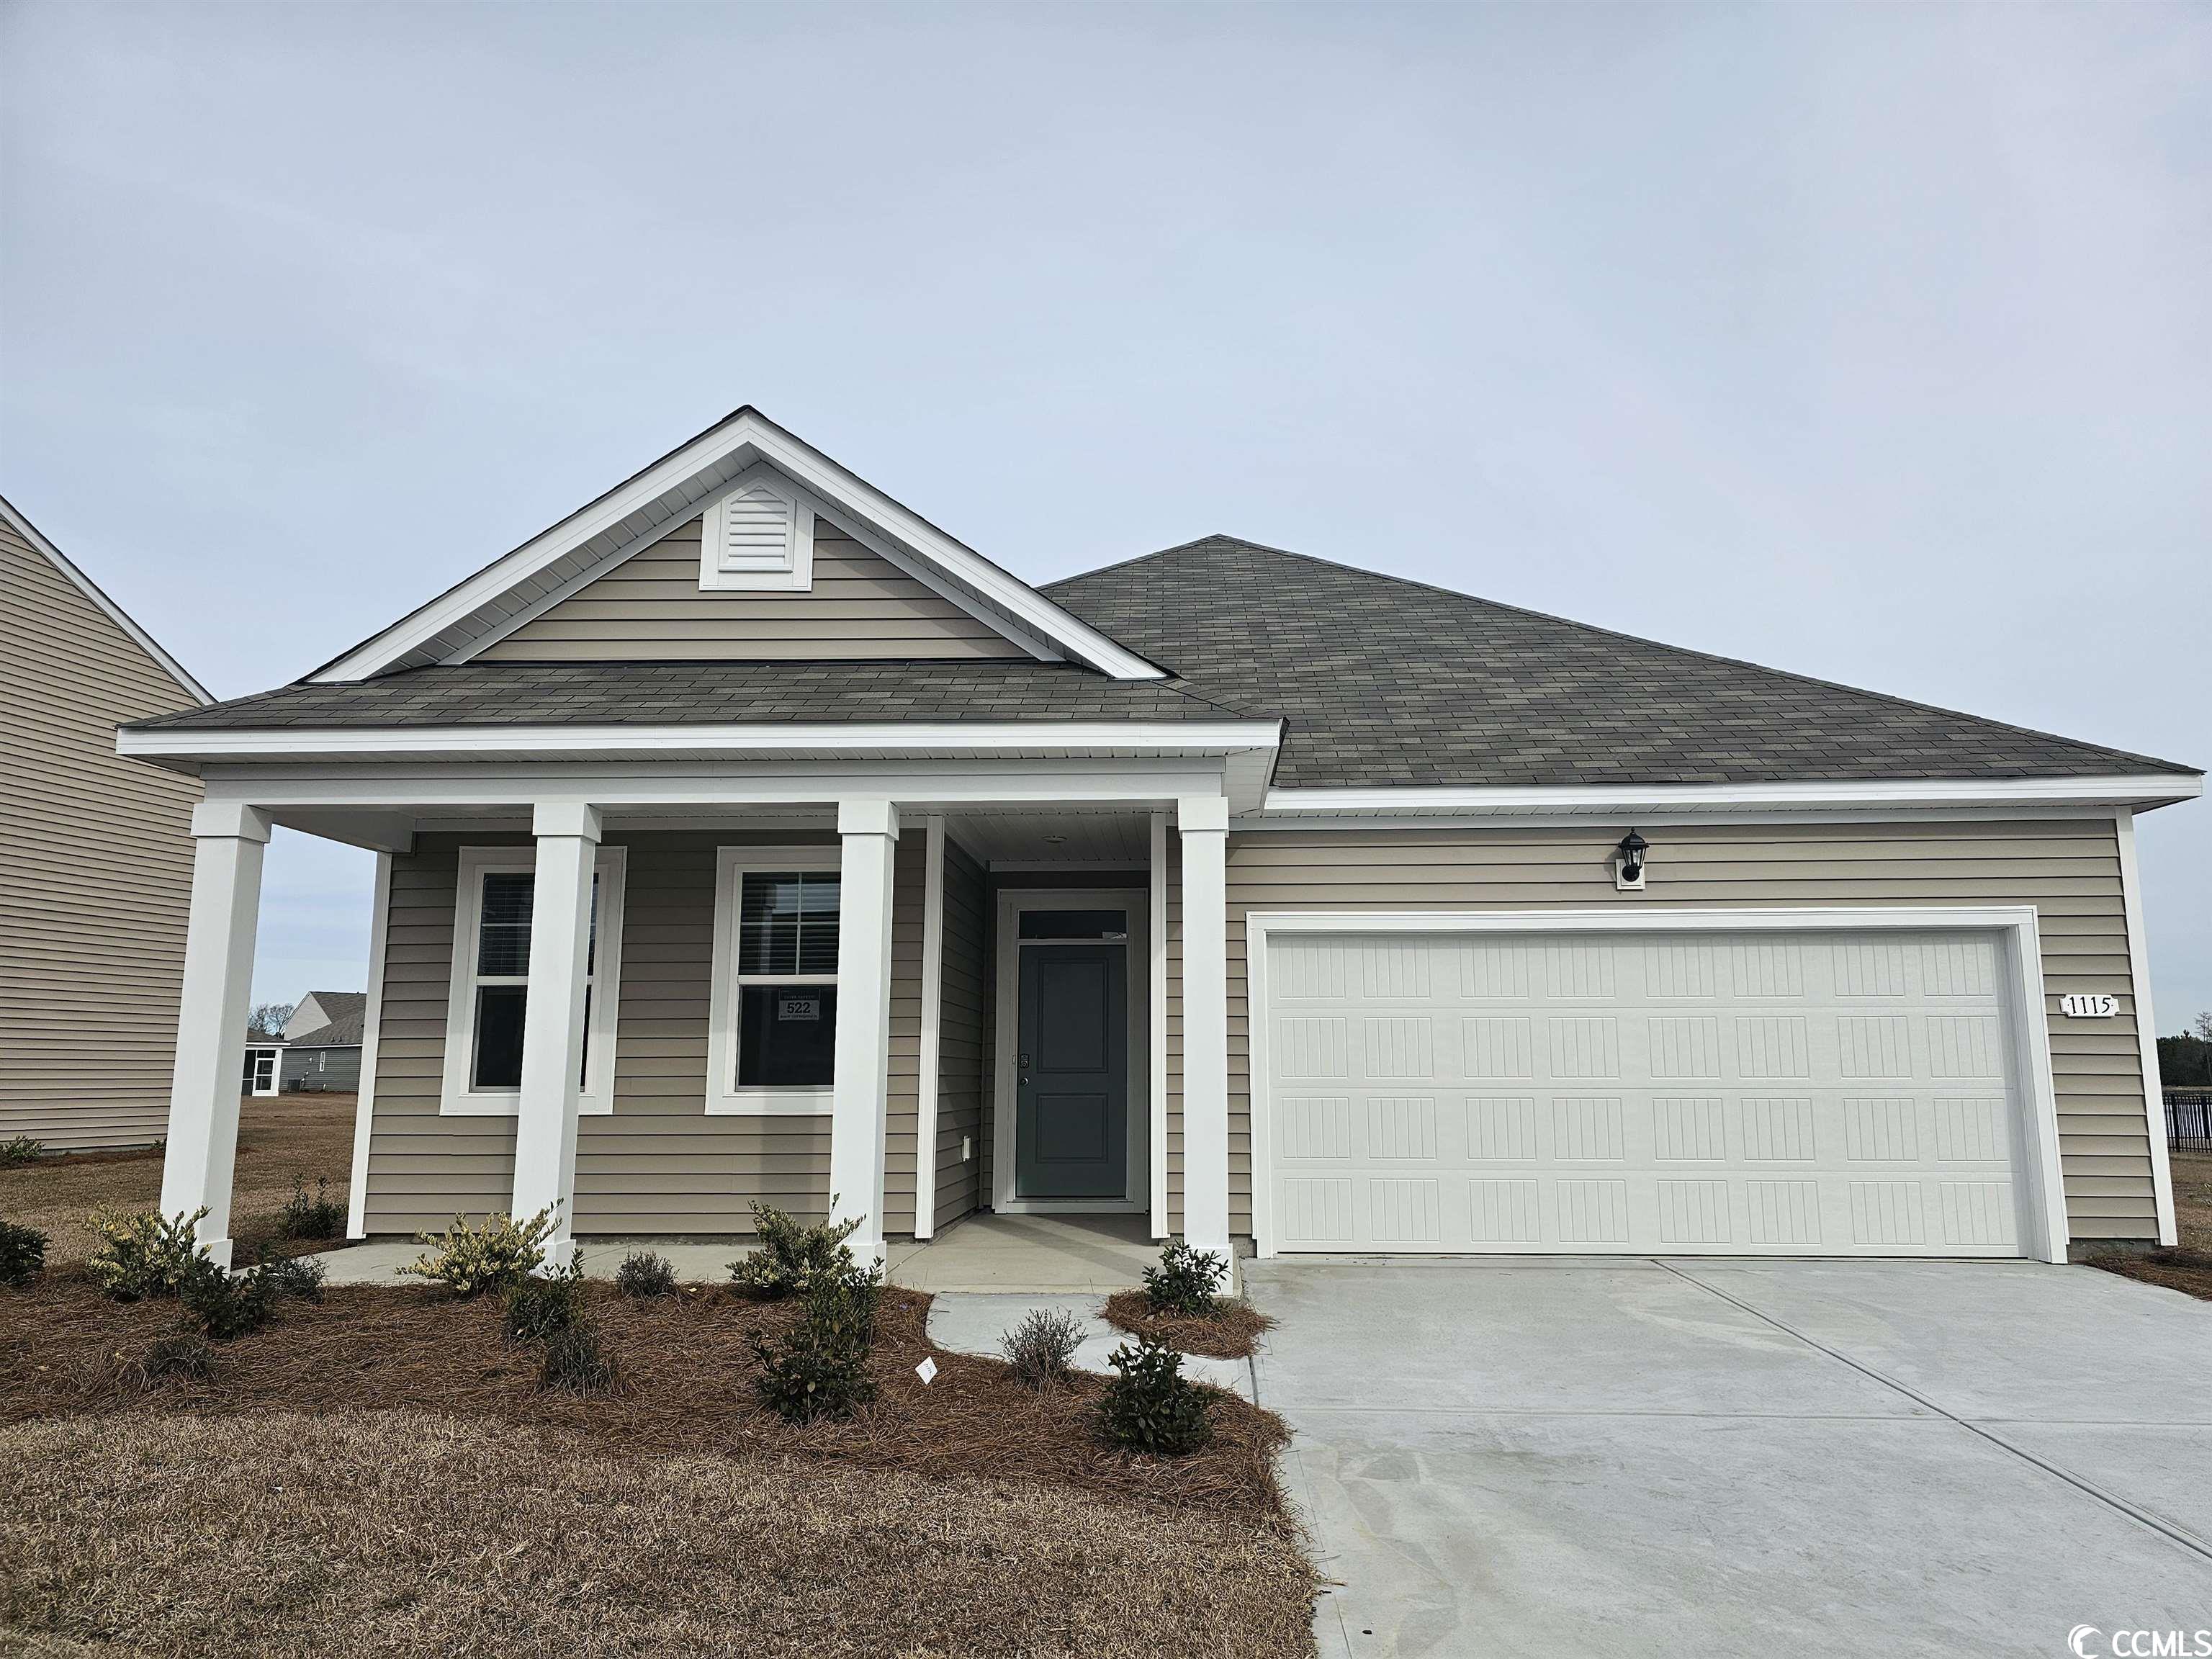 the perfect location; close to conway medical center, college, downtown conway, myrtle beach shops/restaurants and beaches. this new community offers a clubhouse, pool and fitness center! our cali plan is a thoughtfully designed one level home with a beautiful, open concept living area that is perfect for entertaining. the kitchen features granite countertops, an oversized island, 36" cabinetry, a walk-in pantry, and stainless whirlpool appliances. the large owner's suite is tucked away at the back of the home, separated from the other bedrooms, with a walk-in closet and spacious en suite bath with a double vanity, 5' shower, and separate linen closet.  spacious covered front and rear porches add additional outdoor living space. this is america's smart home! each of our homes comes with an industry leading smart home package that will allow you to control the thermostat, front door light and lock, and video doorbell from your smartphone or with voice commands to alexa. *photos are of a similar aria home.  (home and community information, including pricing, included features, terms, availability and amenities, are subject to change prior to sale at any time without notice or obligation. square footages are approximate. pictures, photographs, colors, features, and sizes are for illustration purposes only and will vary from the homes as built. equal housing opportunity builder.)